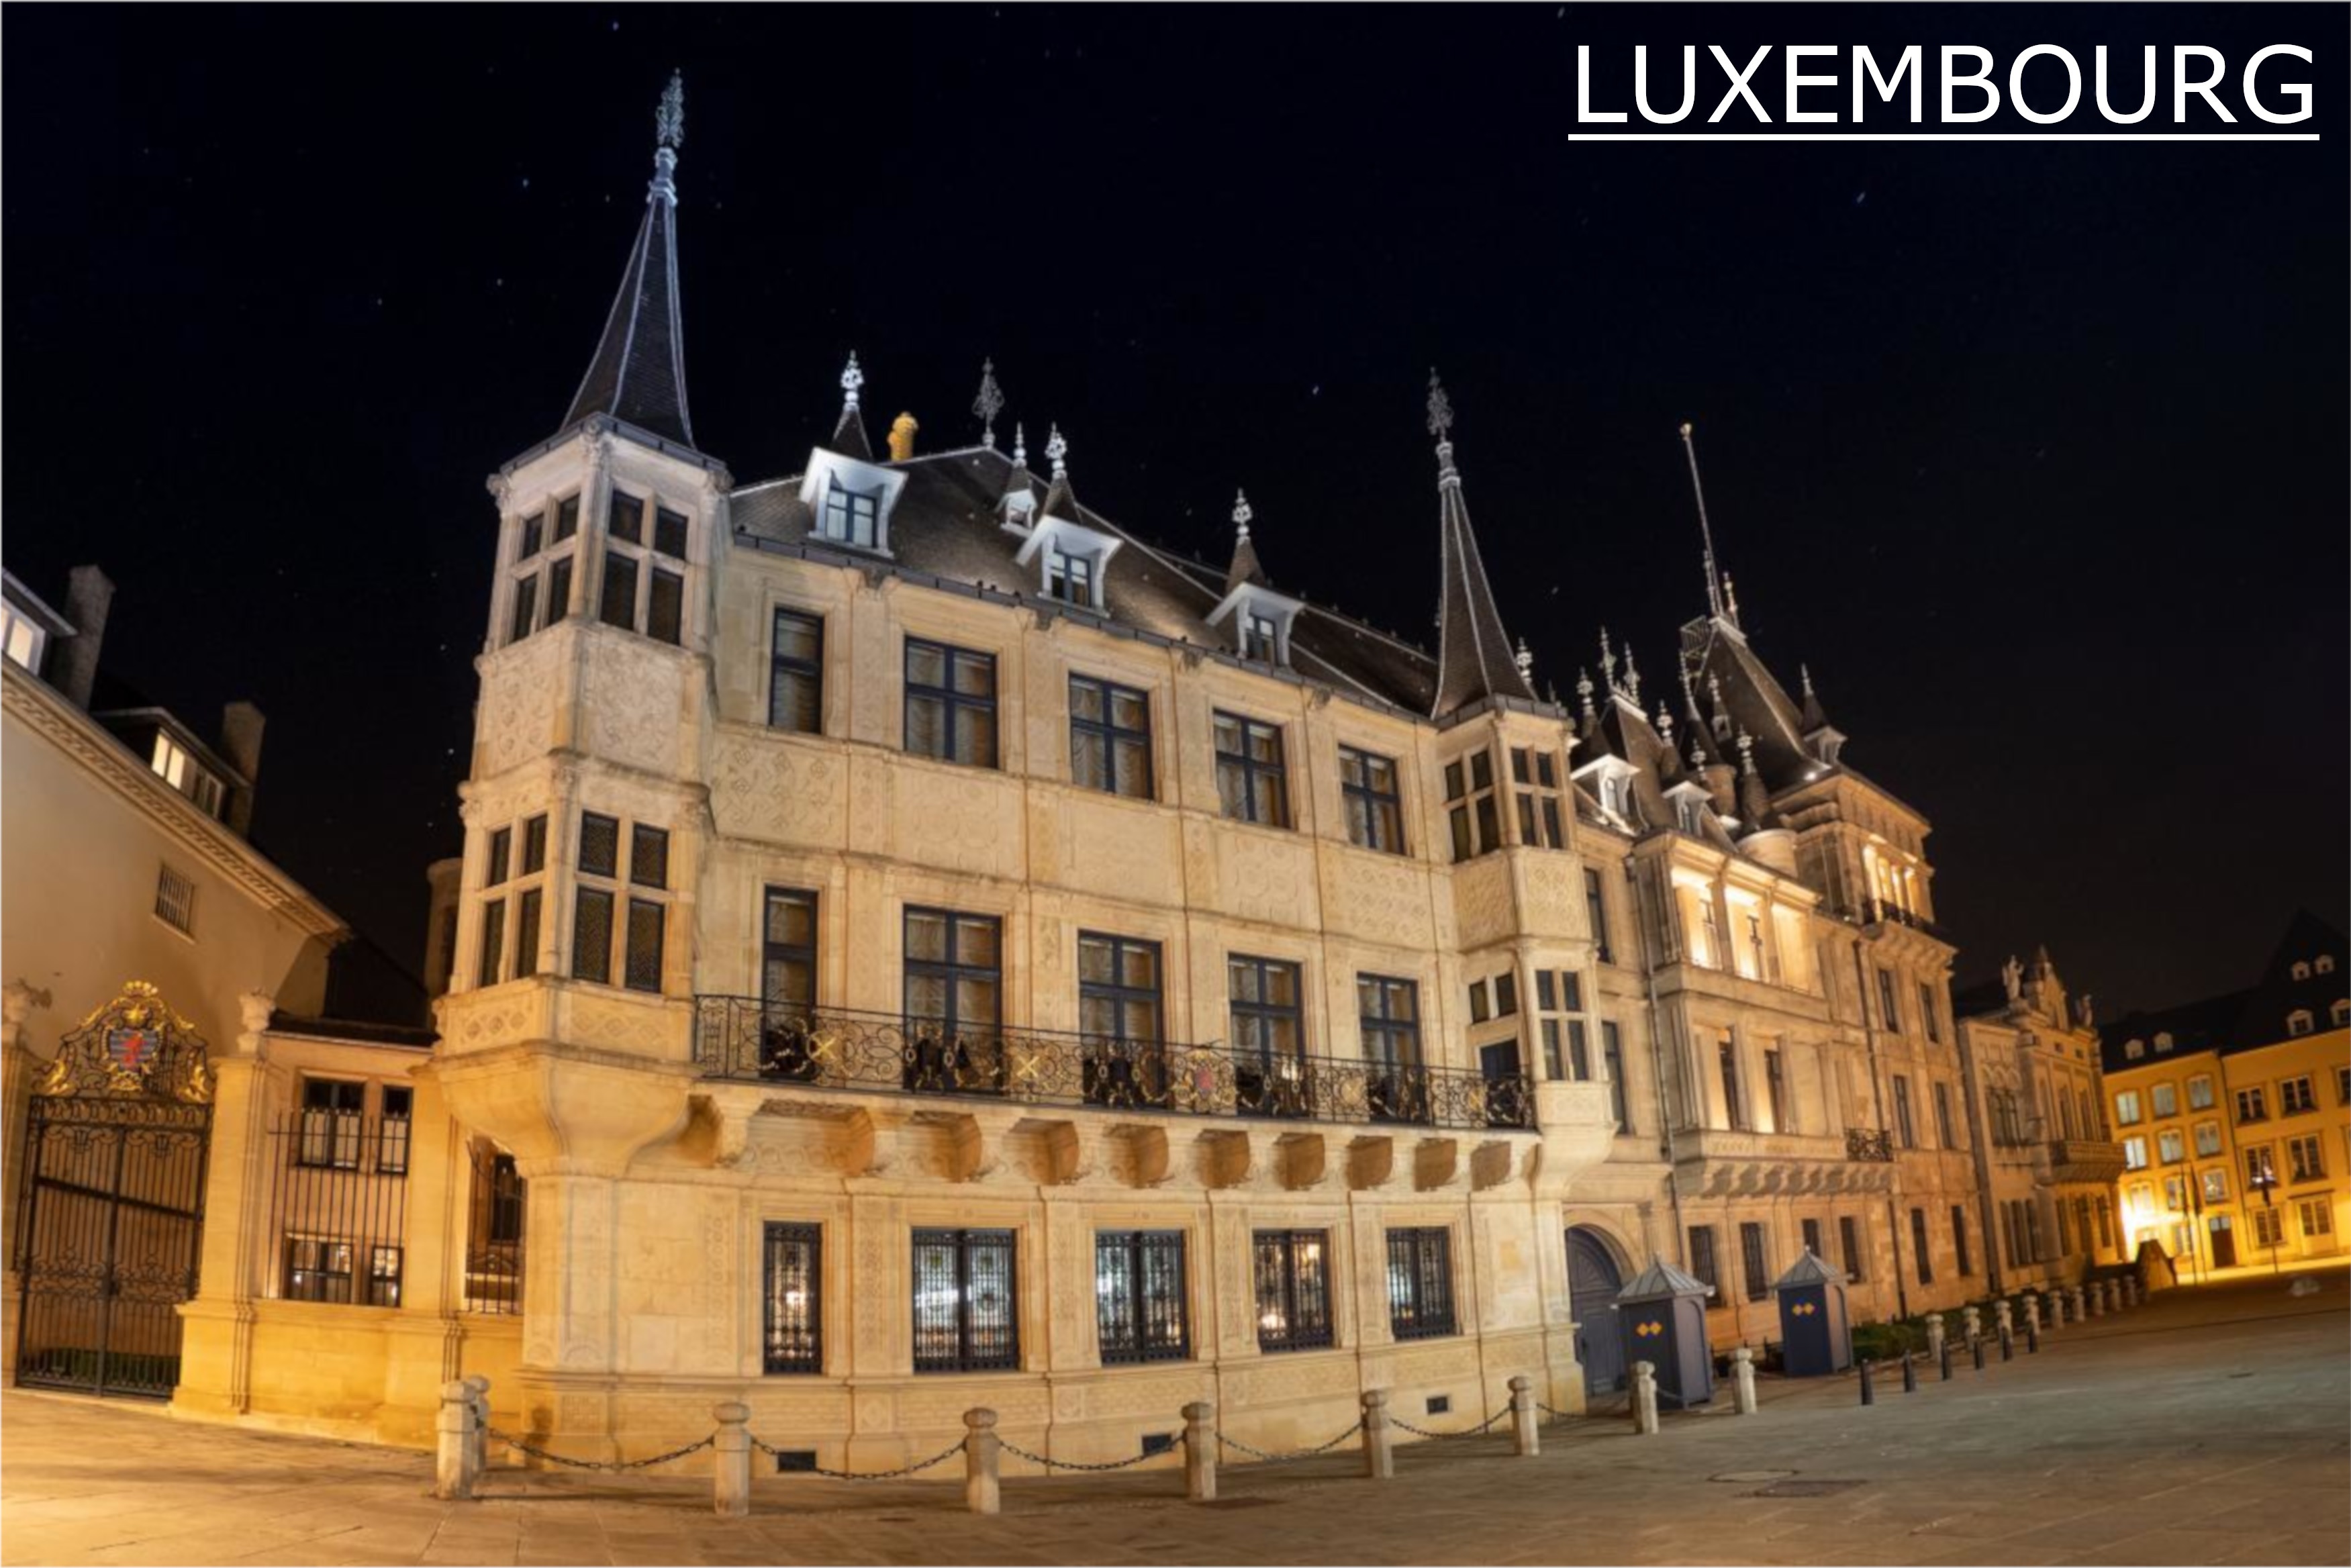 DISCOVER LUXEMBOURG'S CASTLES